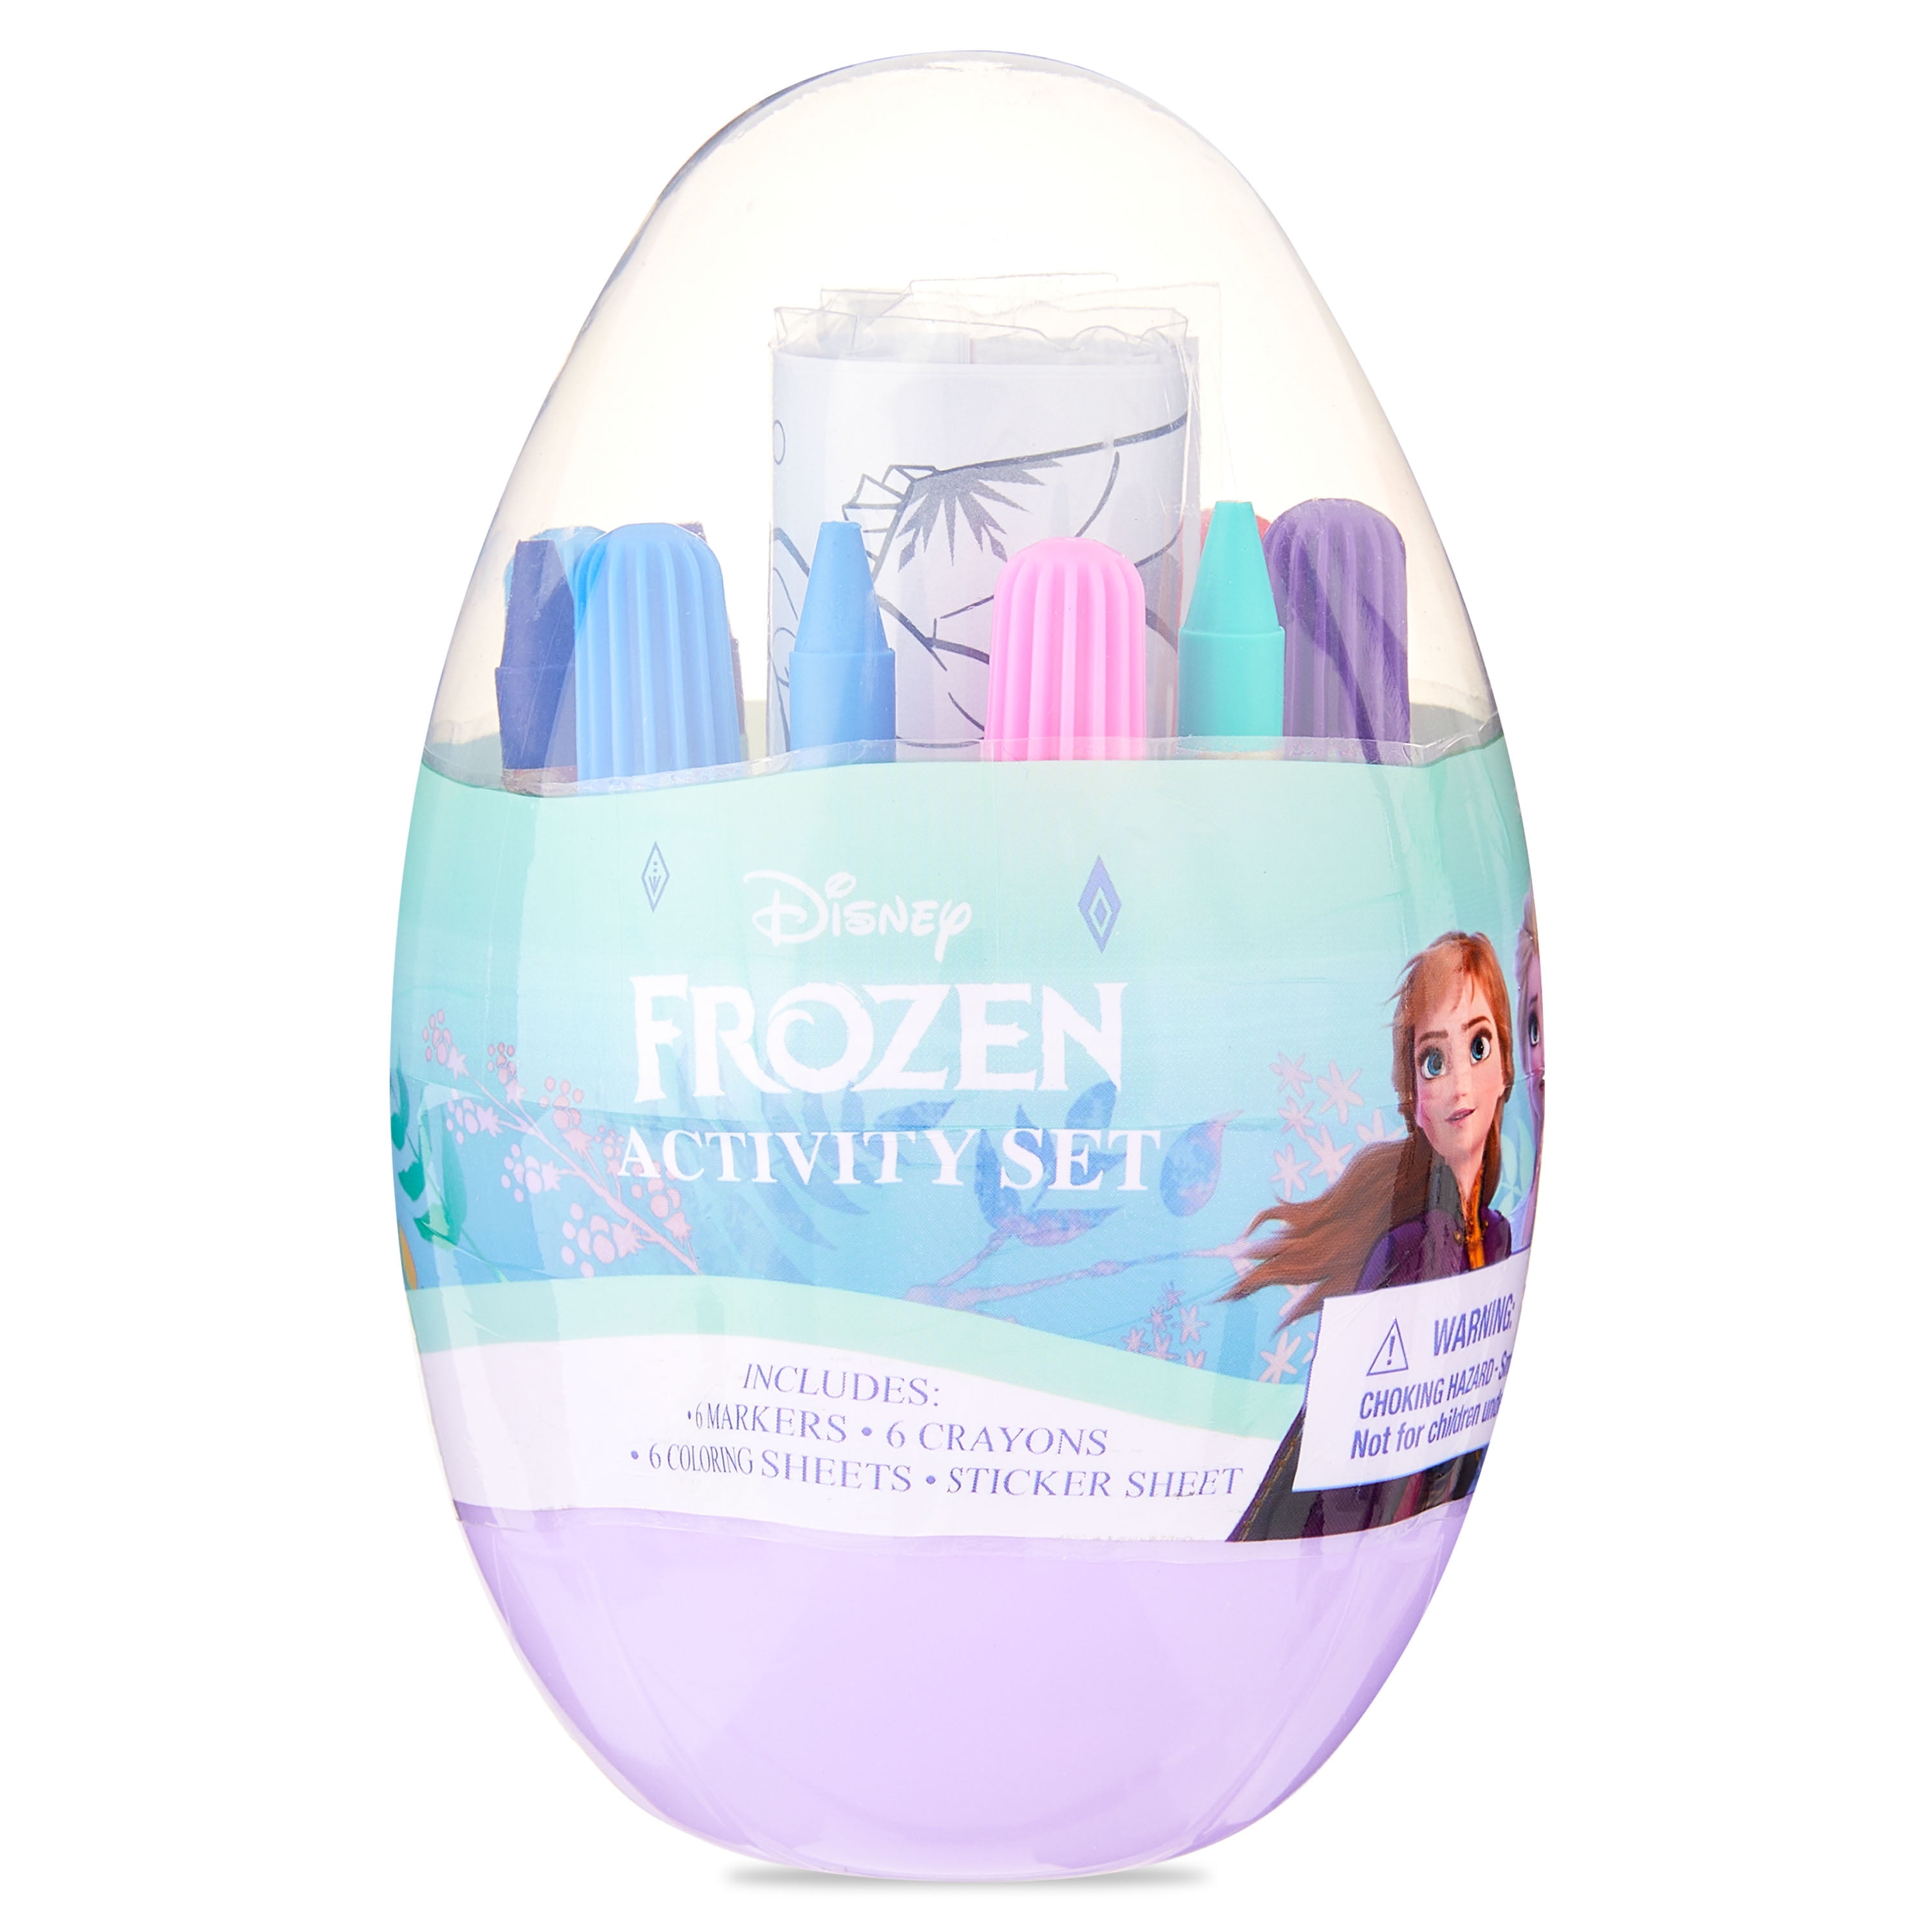 Disney Frozen Plastic Easter Egg Activity Set, Includes Coloring Sheets, Stickers, Markers, Crayons